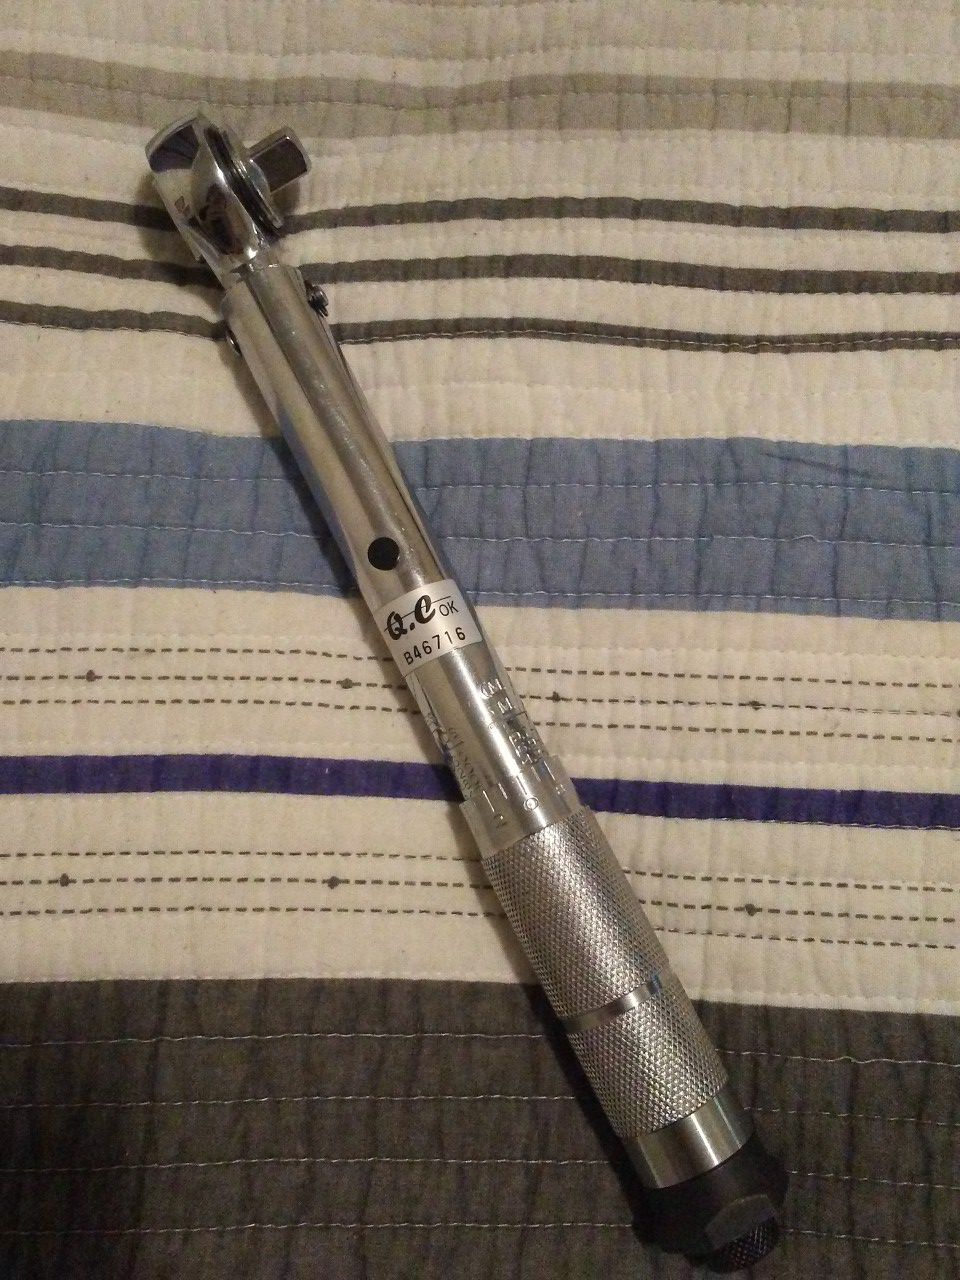 1/2" Torque Wrench - 1 Foot Long